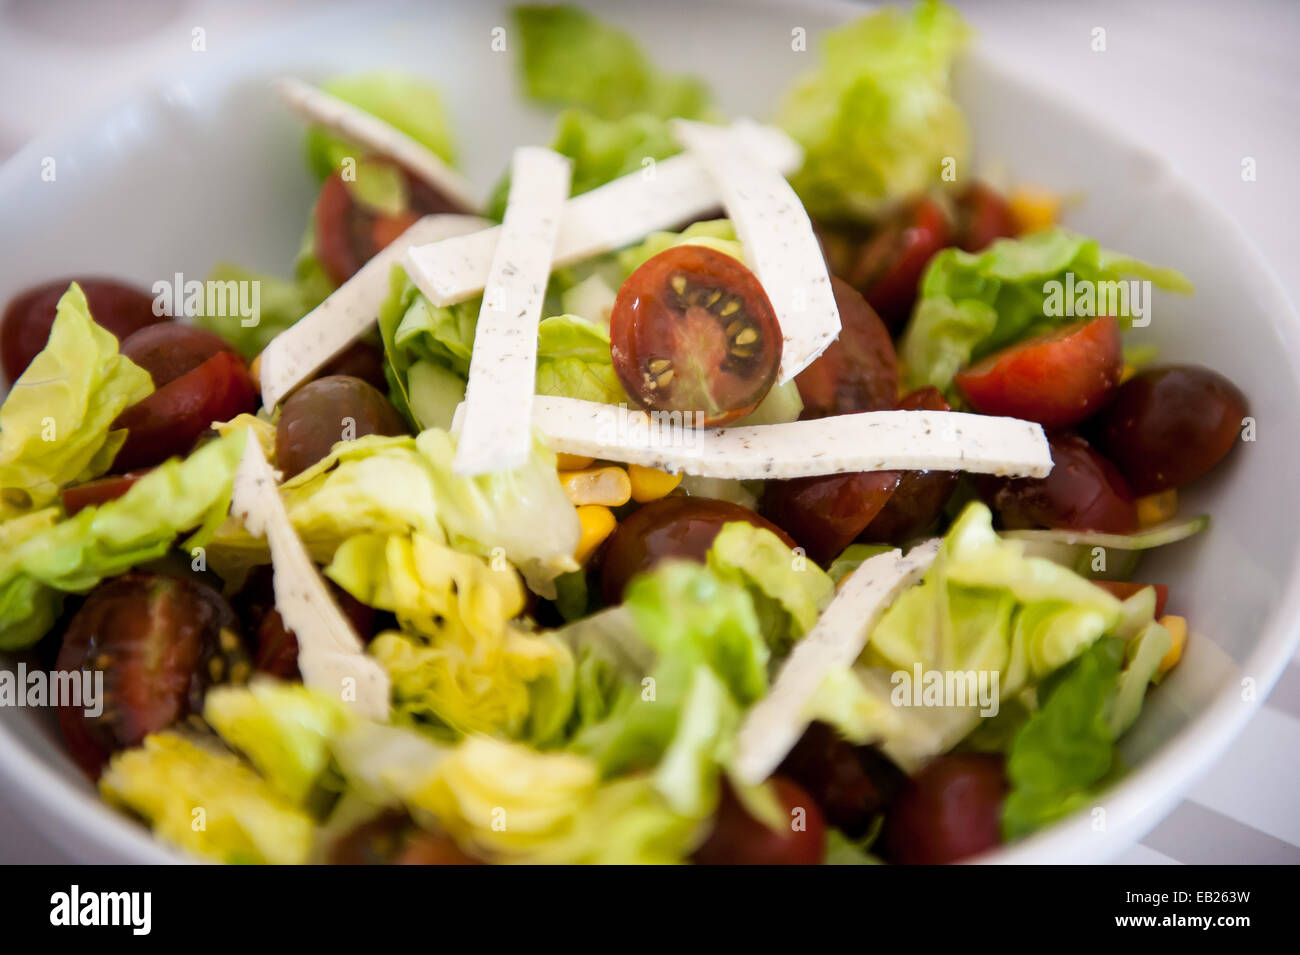 Salad with lettuce, cherry tomatoes and cheese with diced Stock Photo